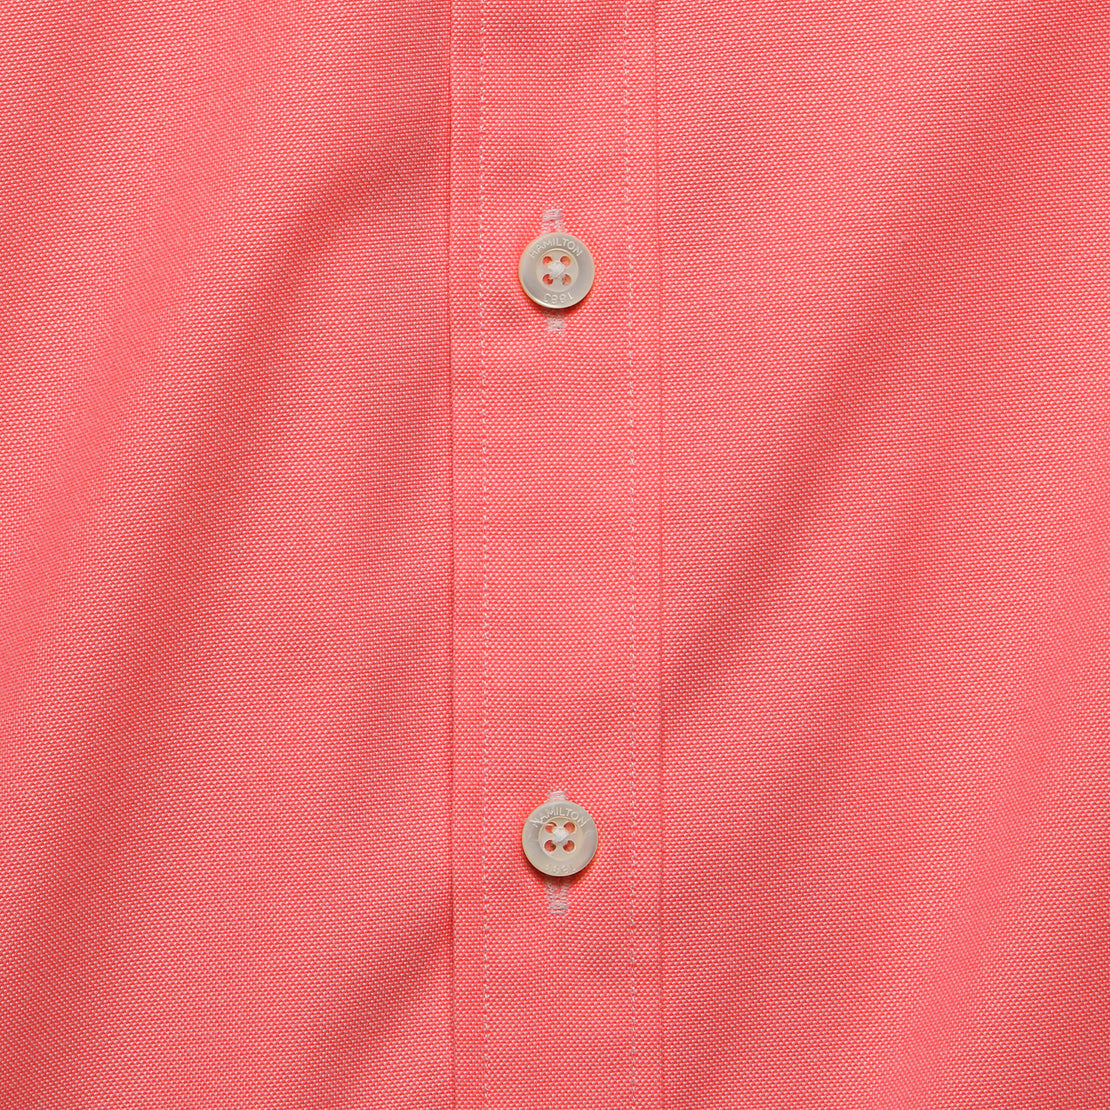 Neon Oxford Shirt - Pink - Hamilton Shirt Co. - STAG Provisions - Tops - L/S Woven - Solid